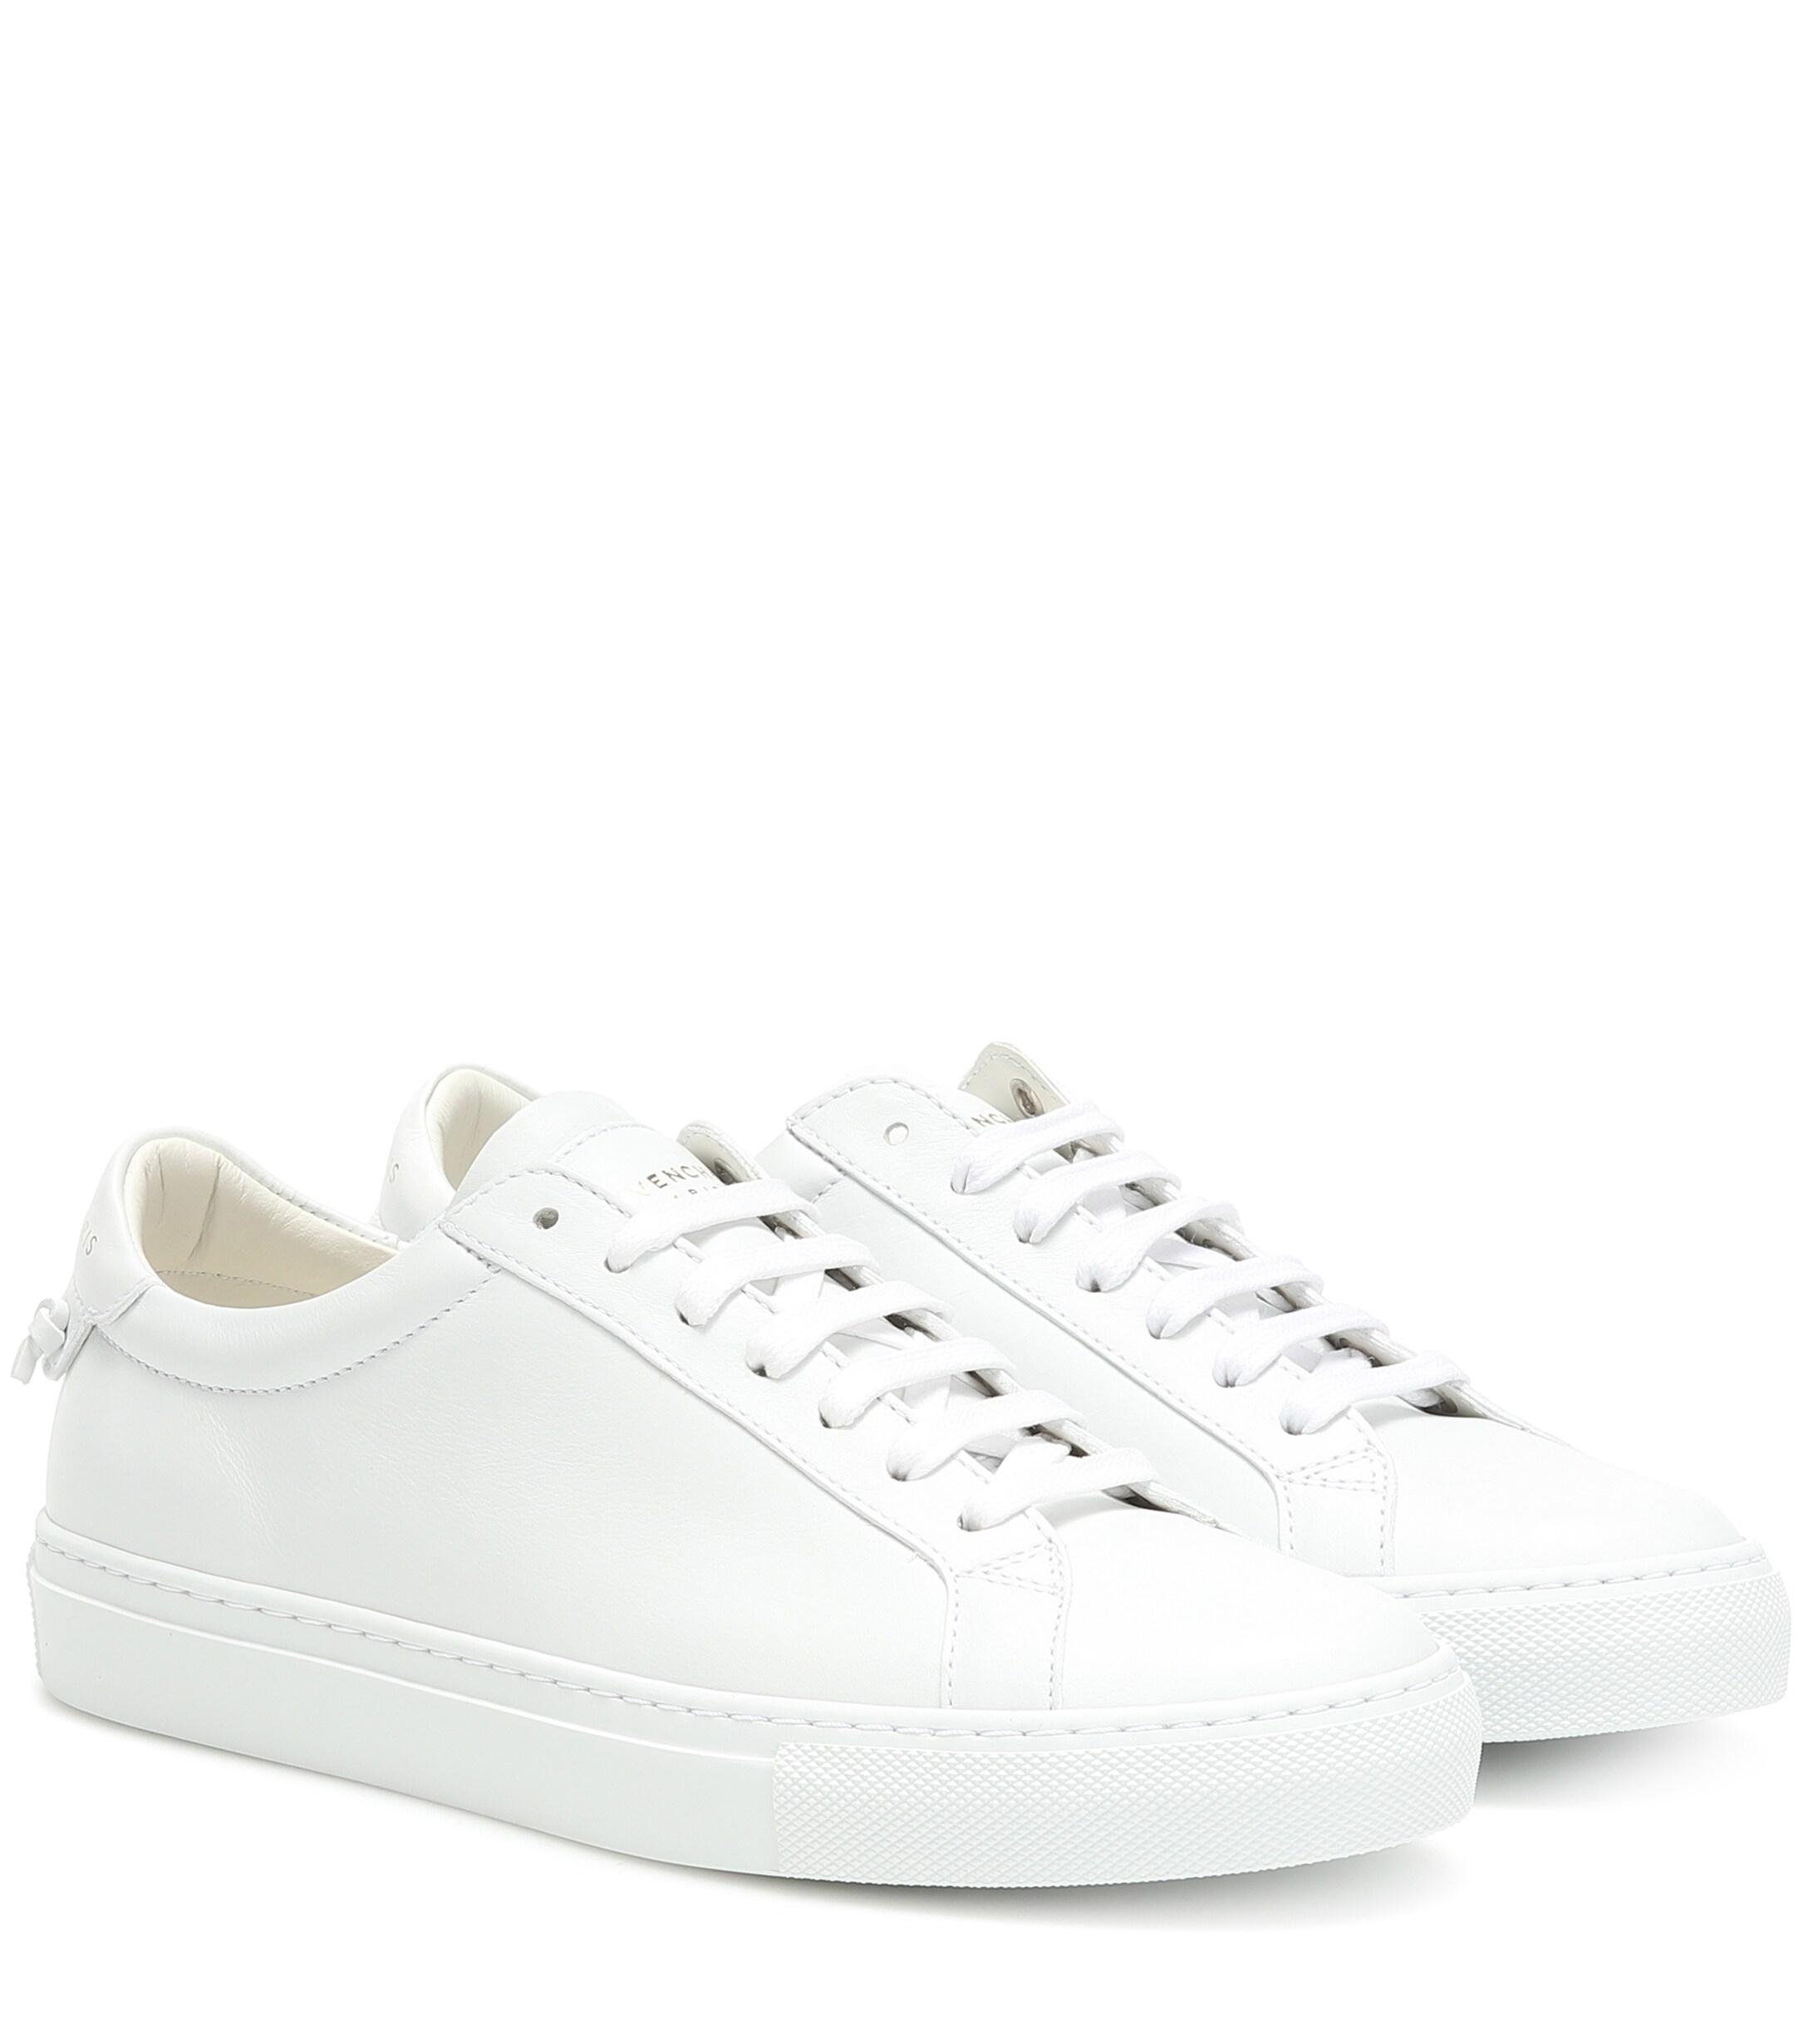 Givenchy Urban Knots Leather Sneakers in White - Lyst